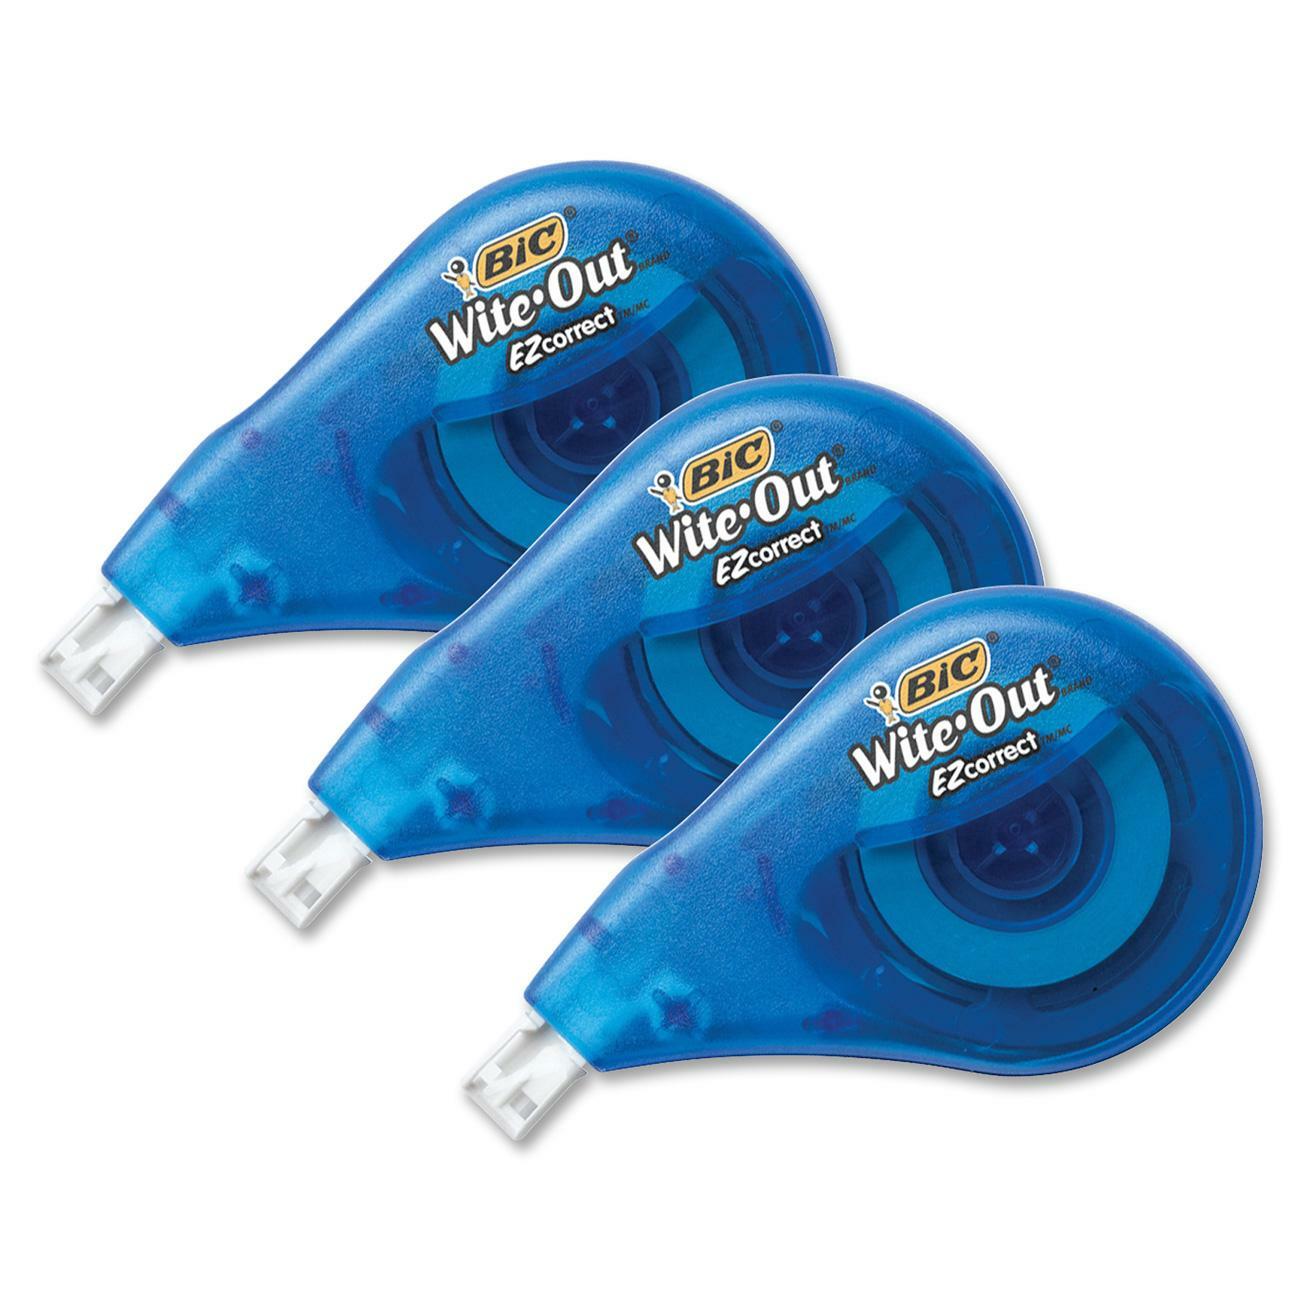 Wite Out Correction Tape Madill The Office Company